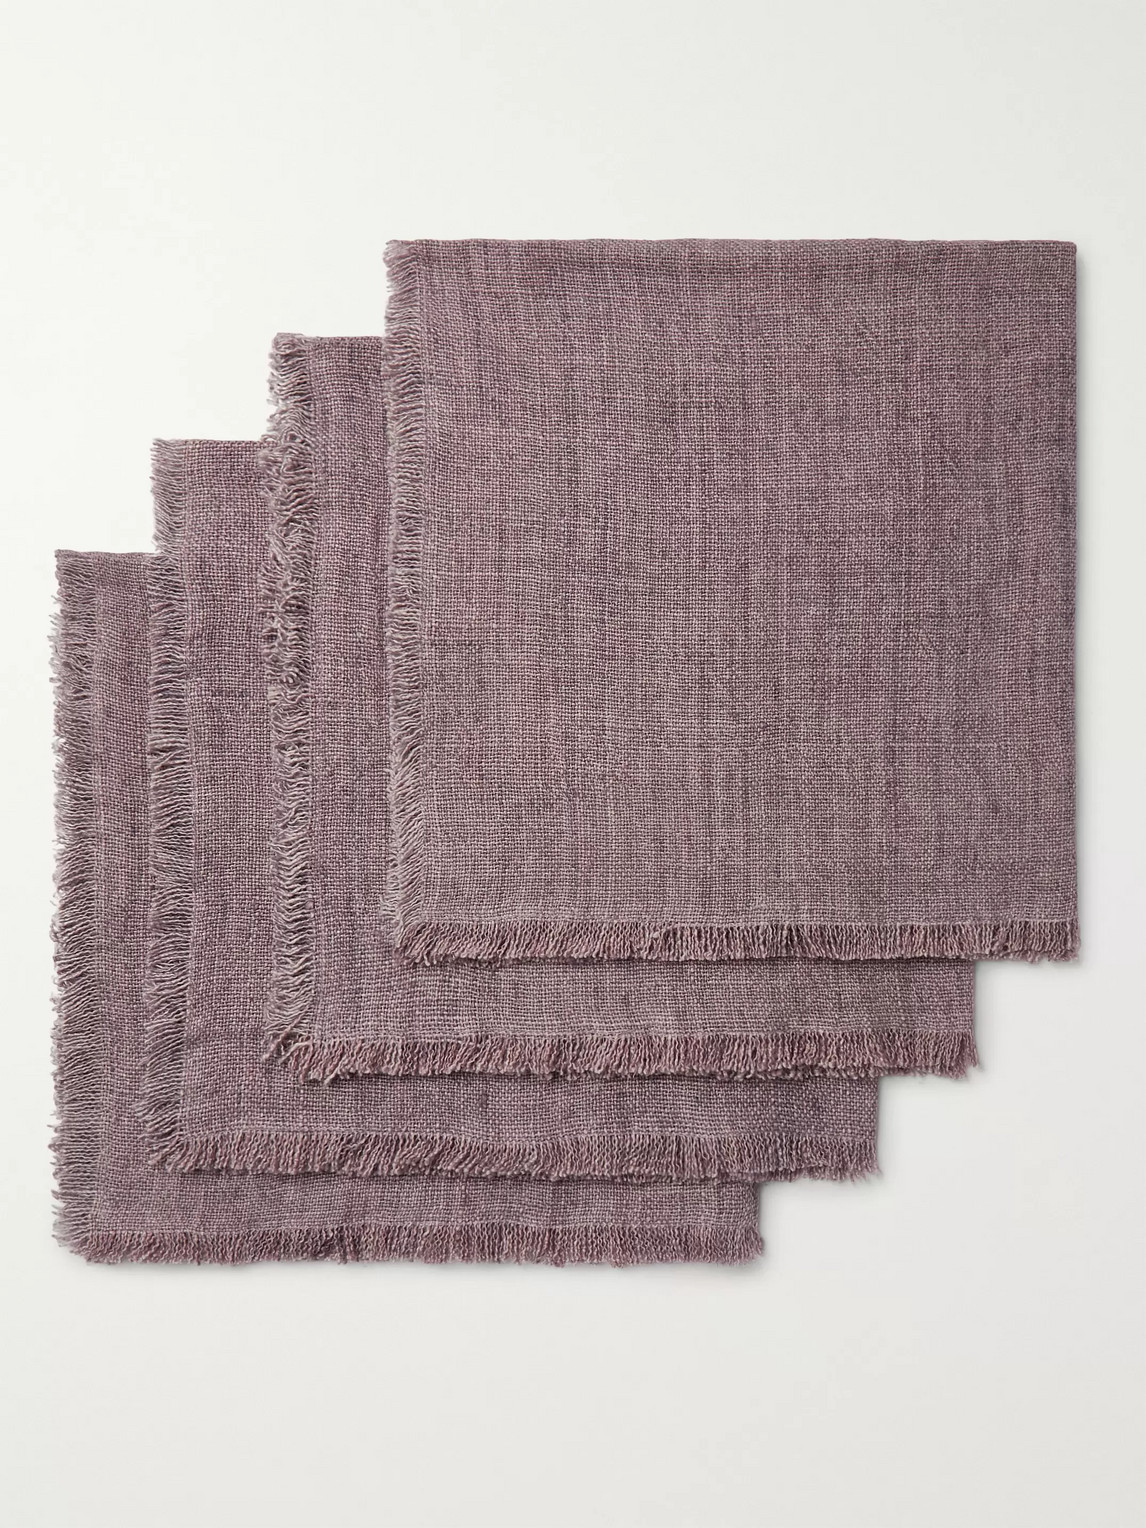 Roman & Williams Guild Four-pack Linen Napkins In Pink